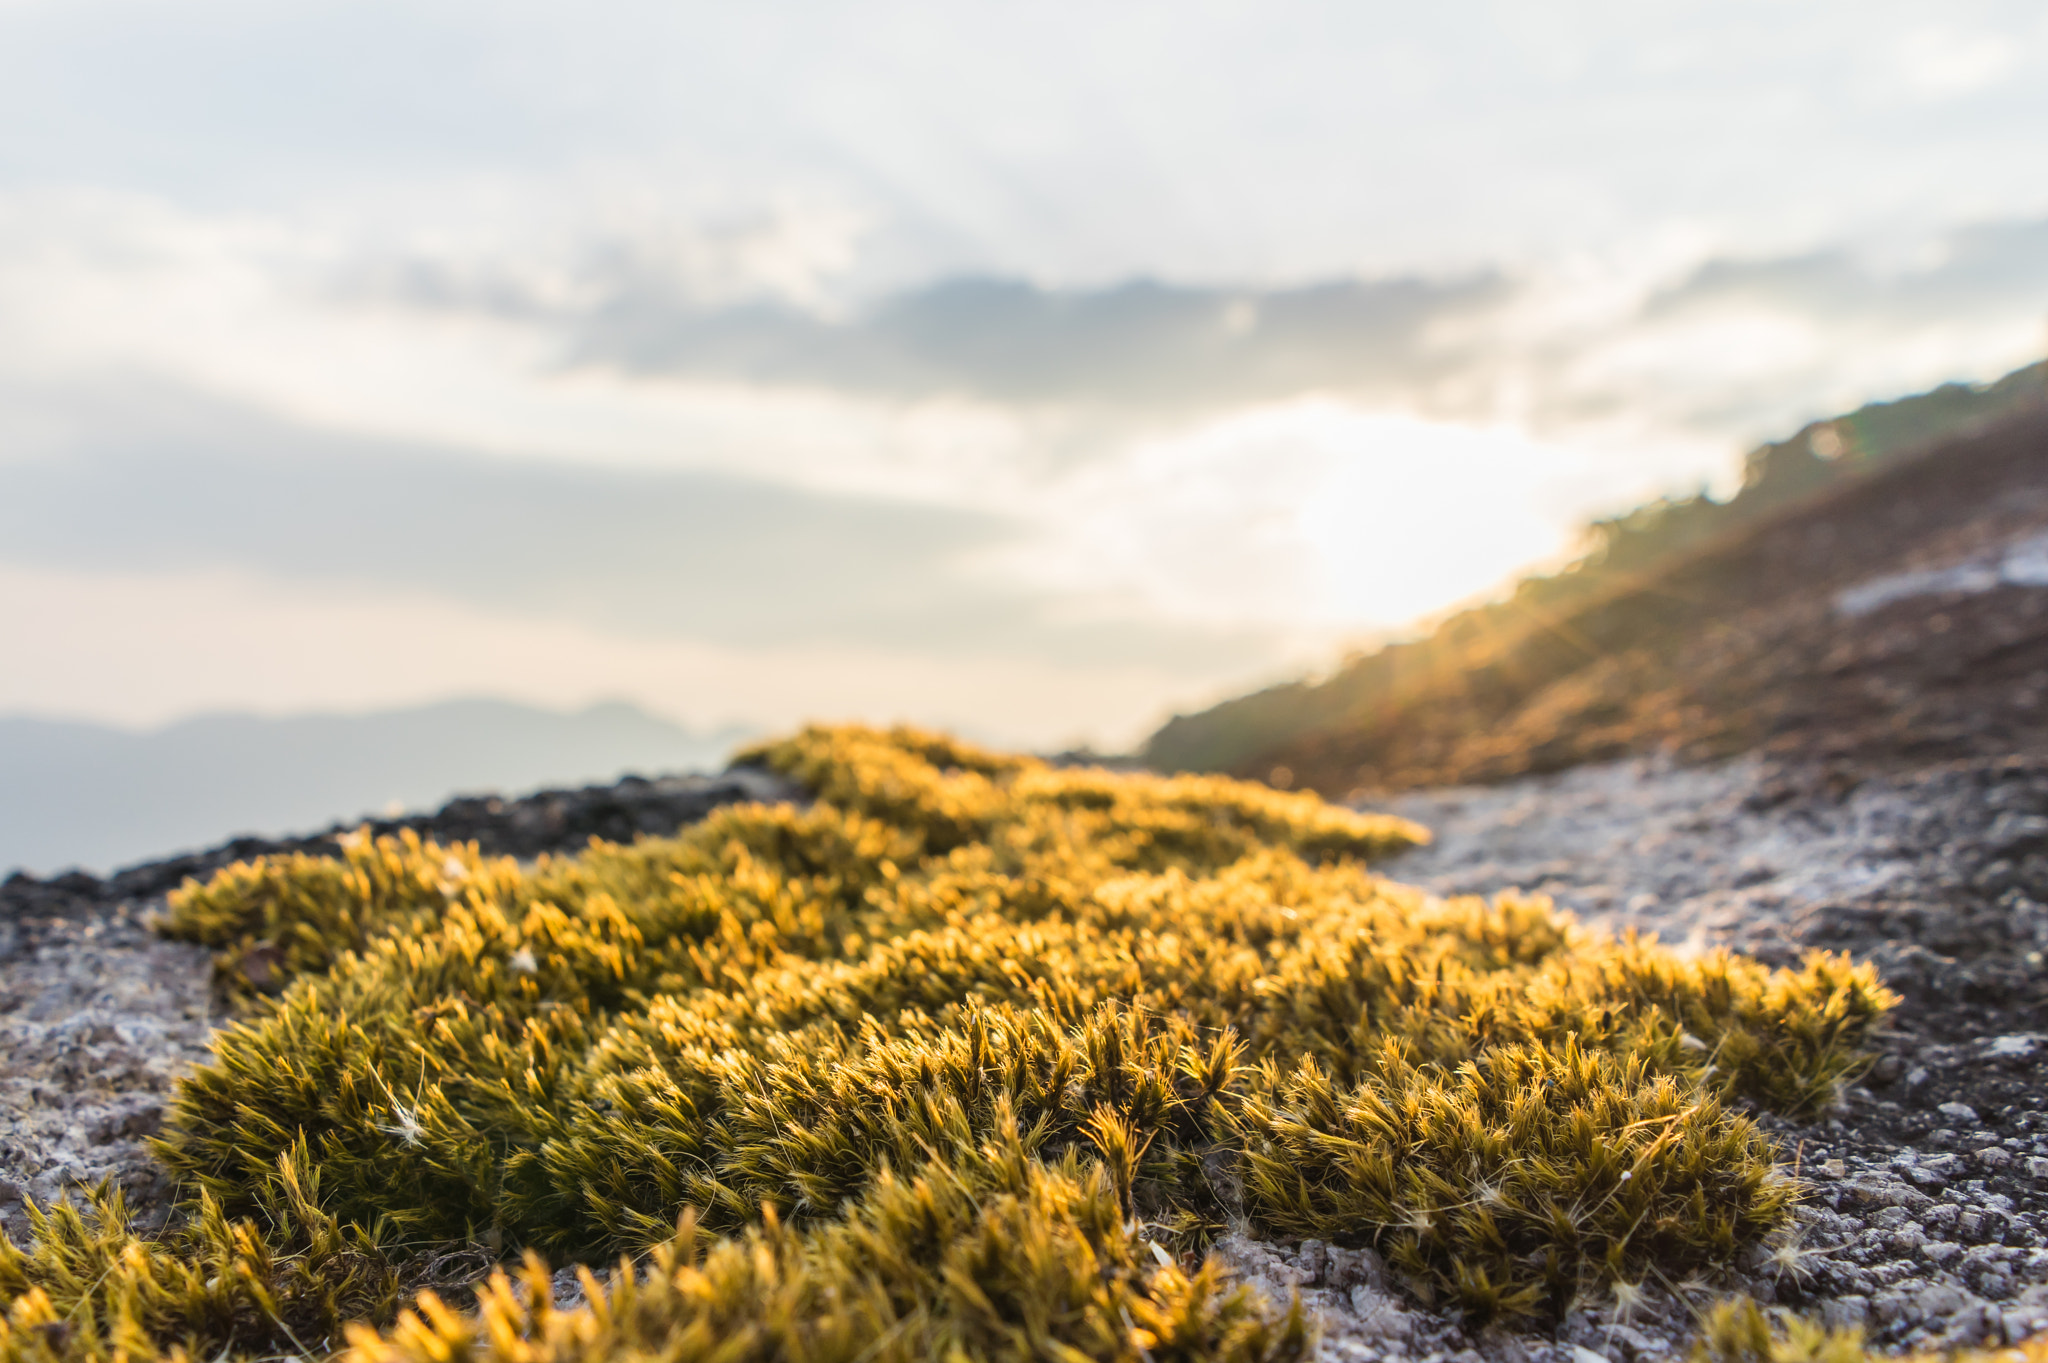 FE 21mm F2.8 sample photo. Moss tree on rock with sunset background photography